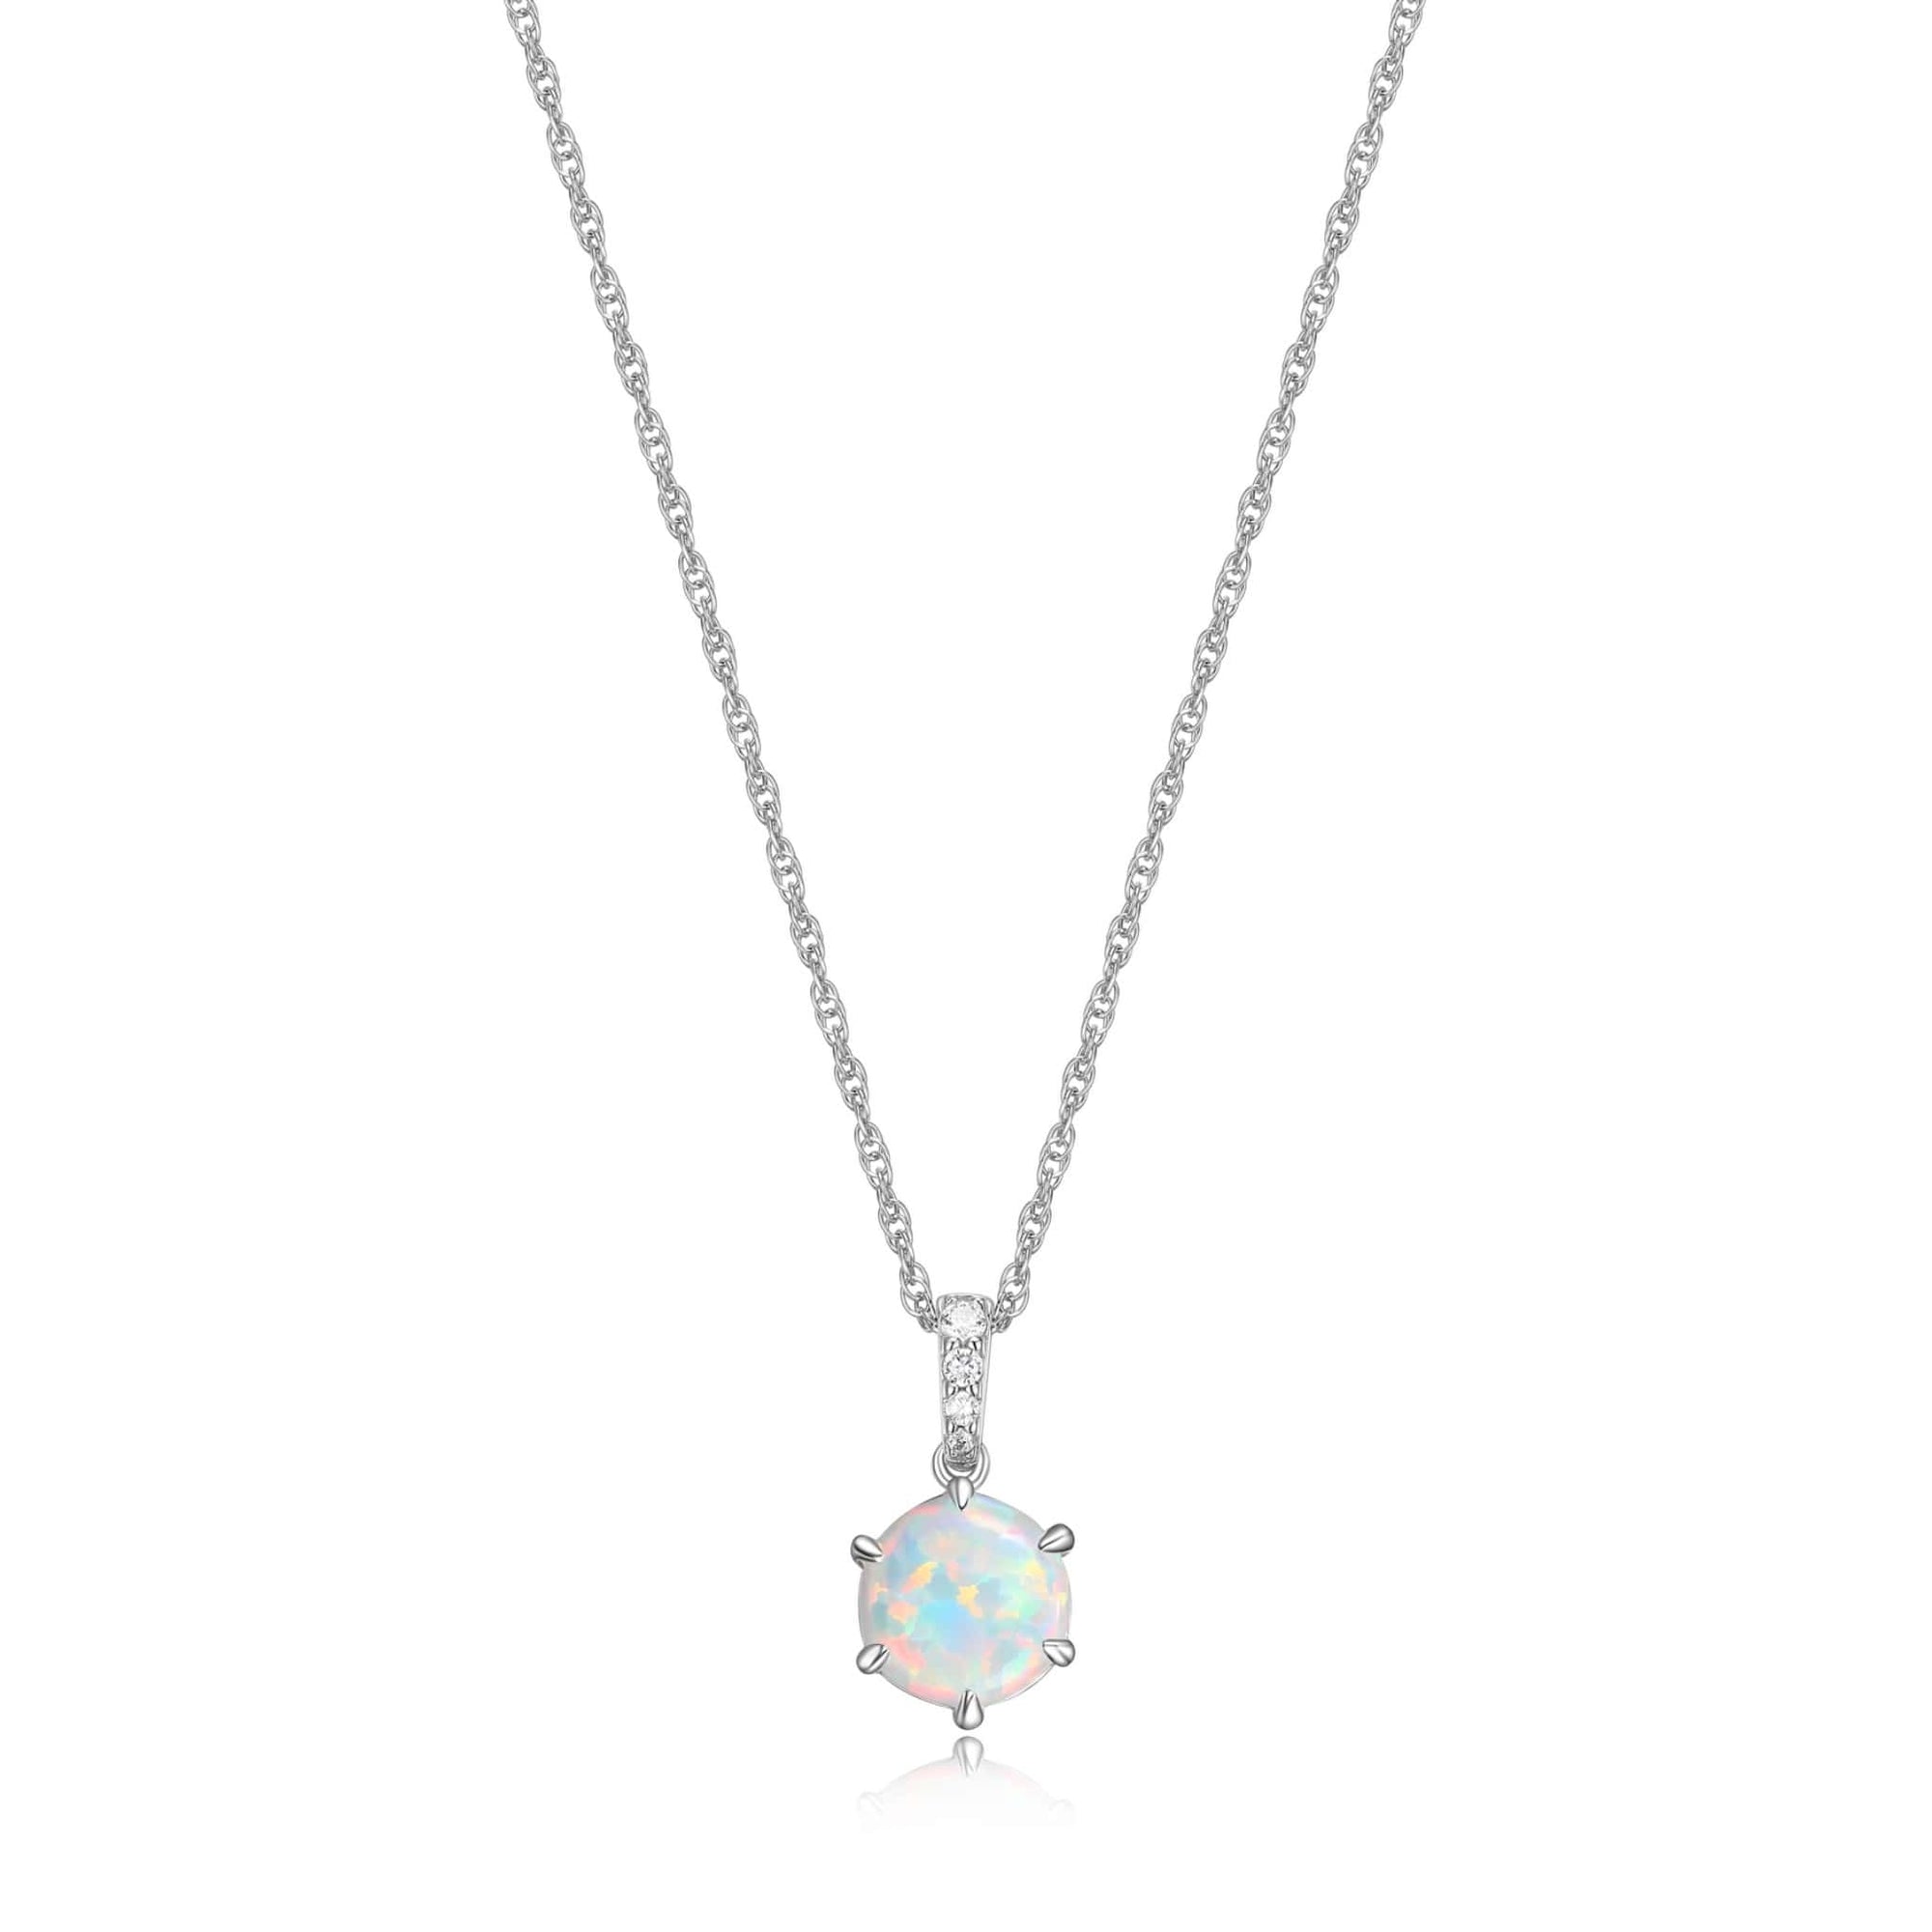 Opal & CZ Silver Necklace at Arman's Jewellers